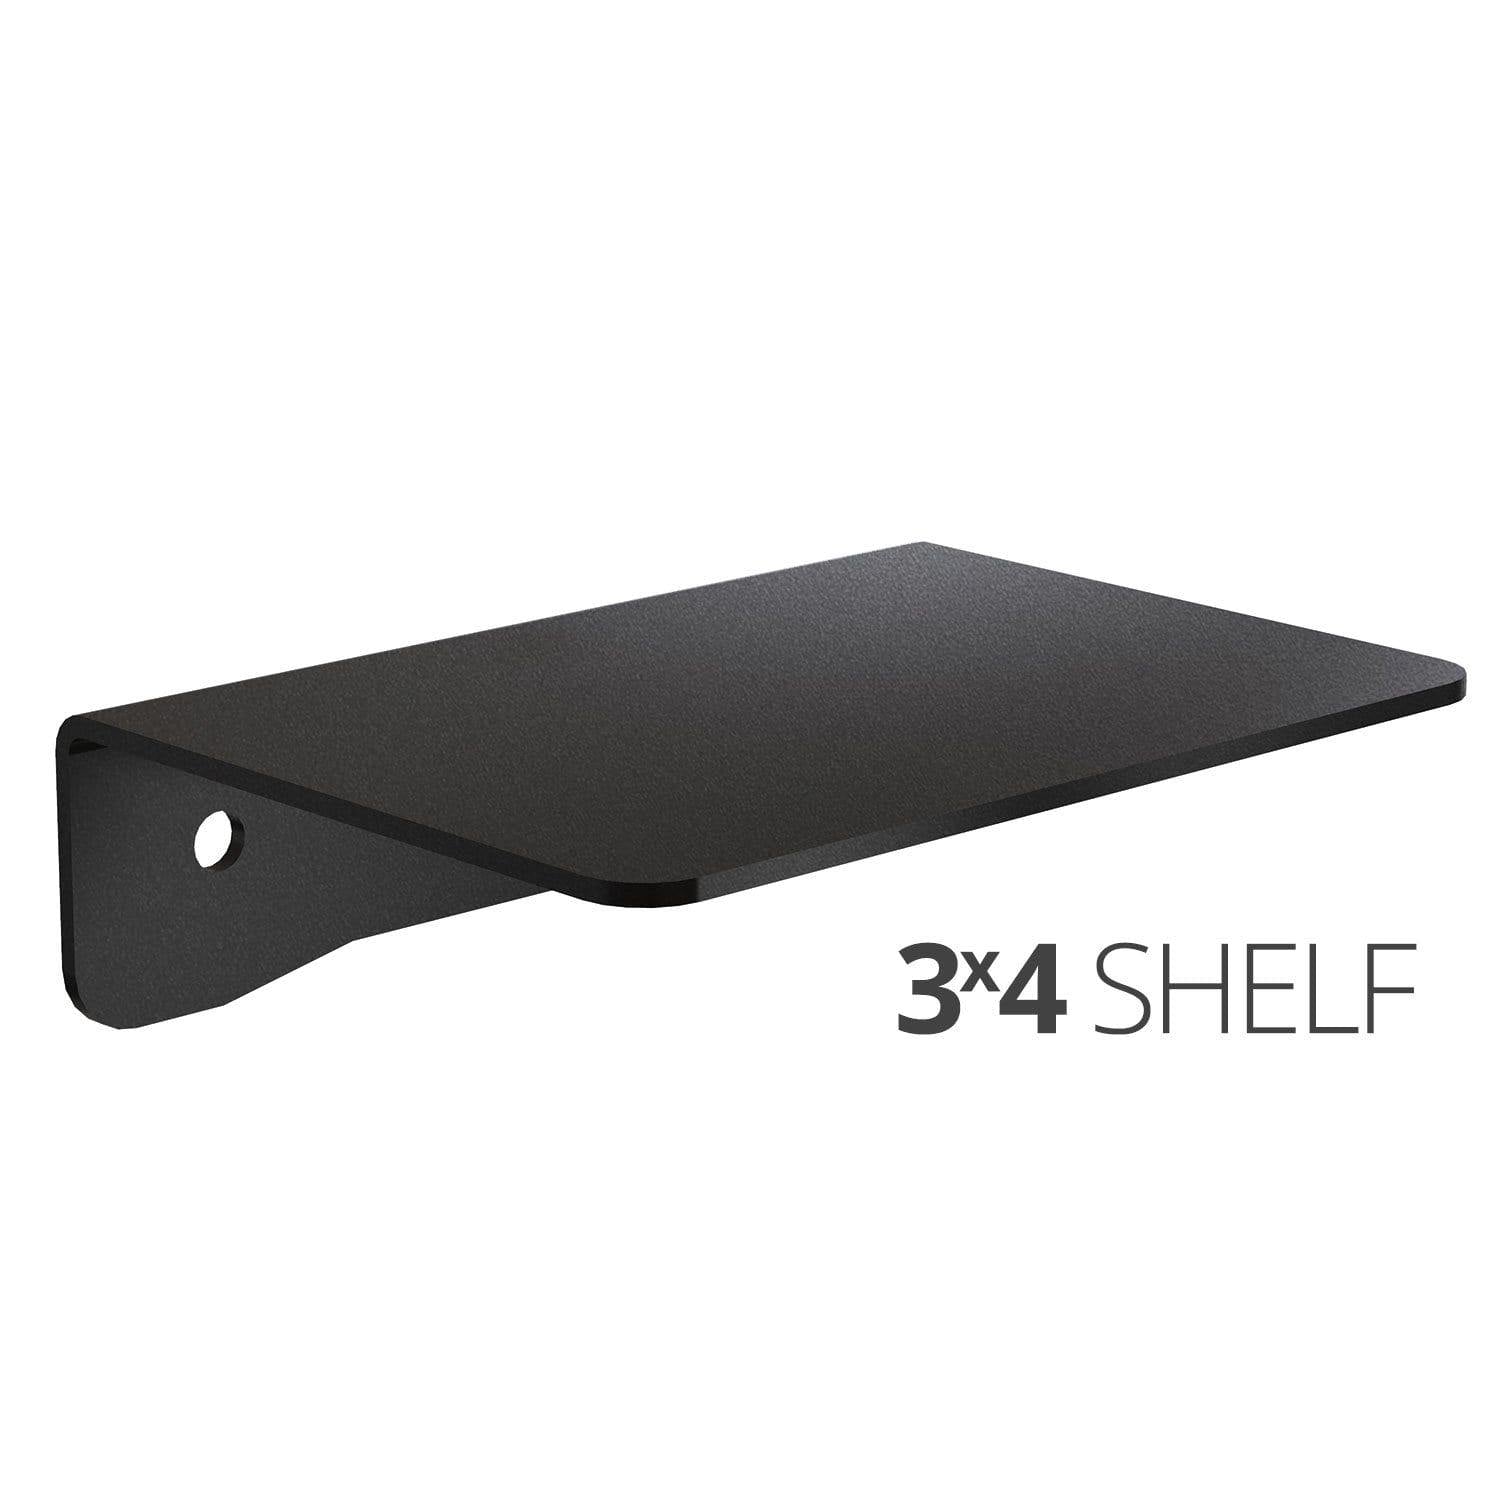 Small wall mounted shelf for home, office and garage - 3x4 angle